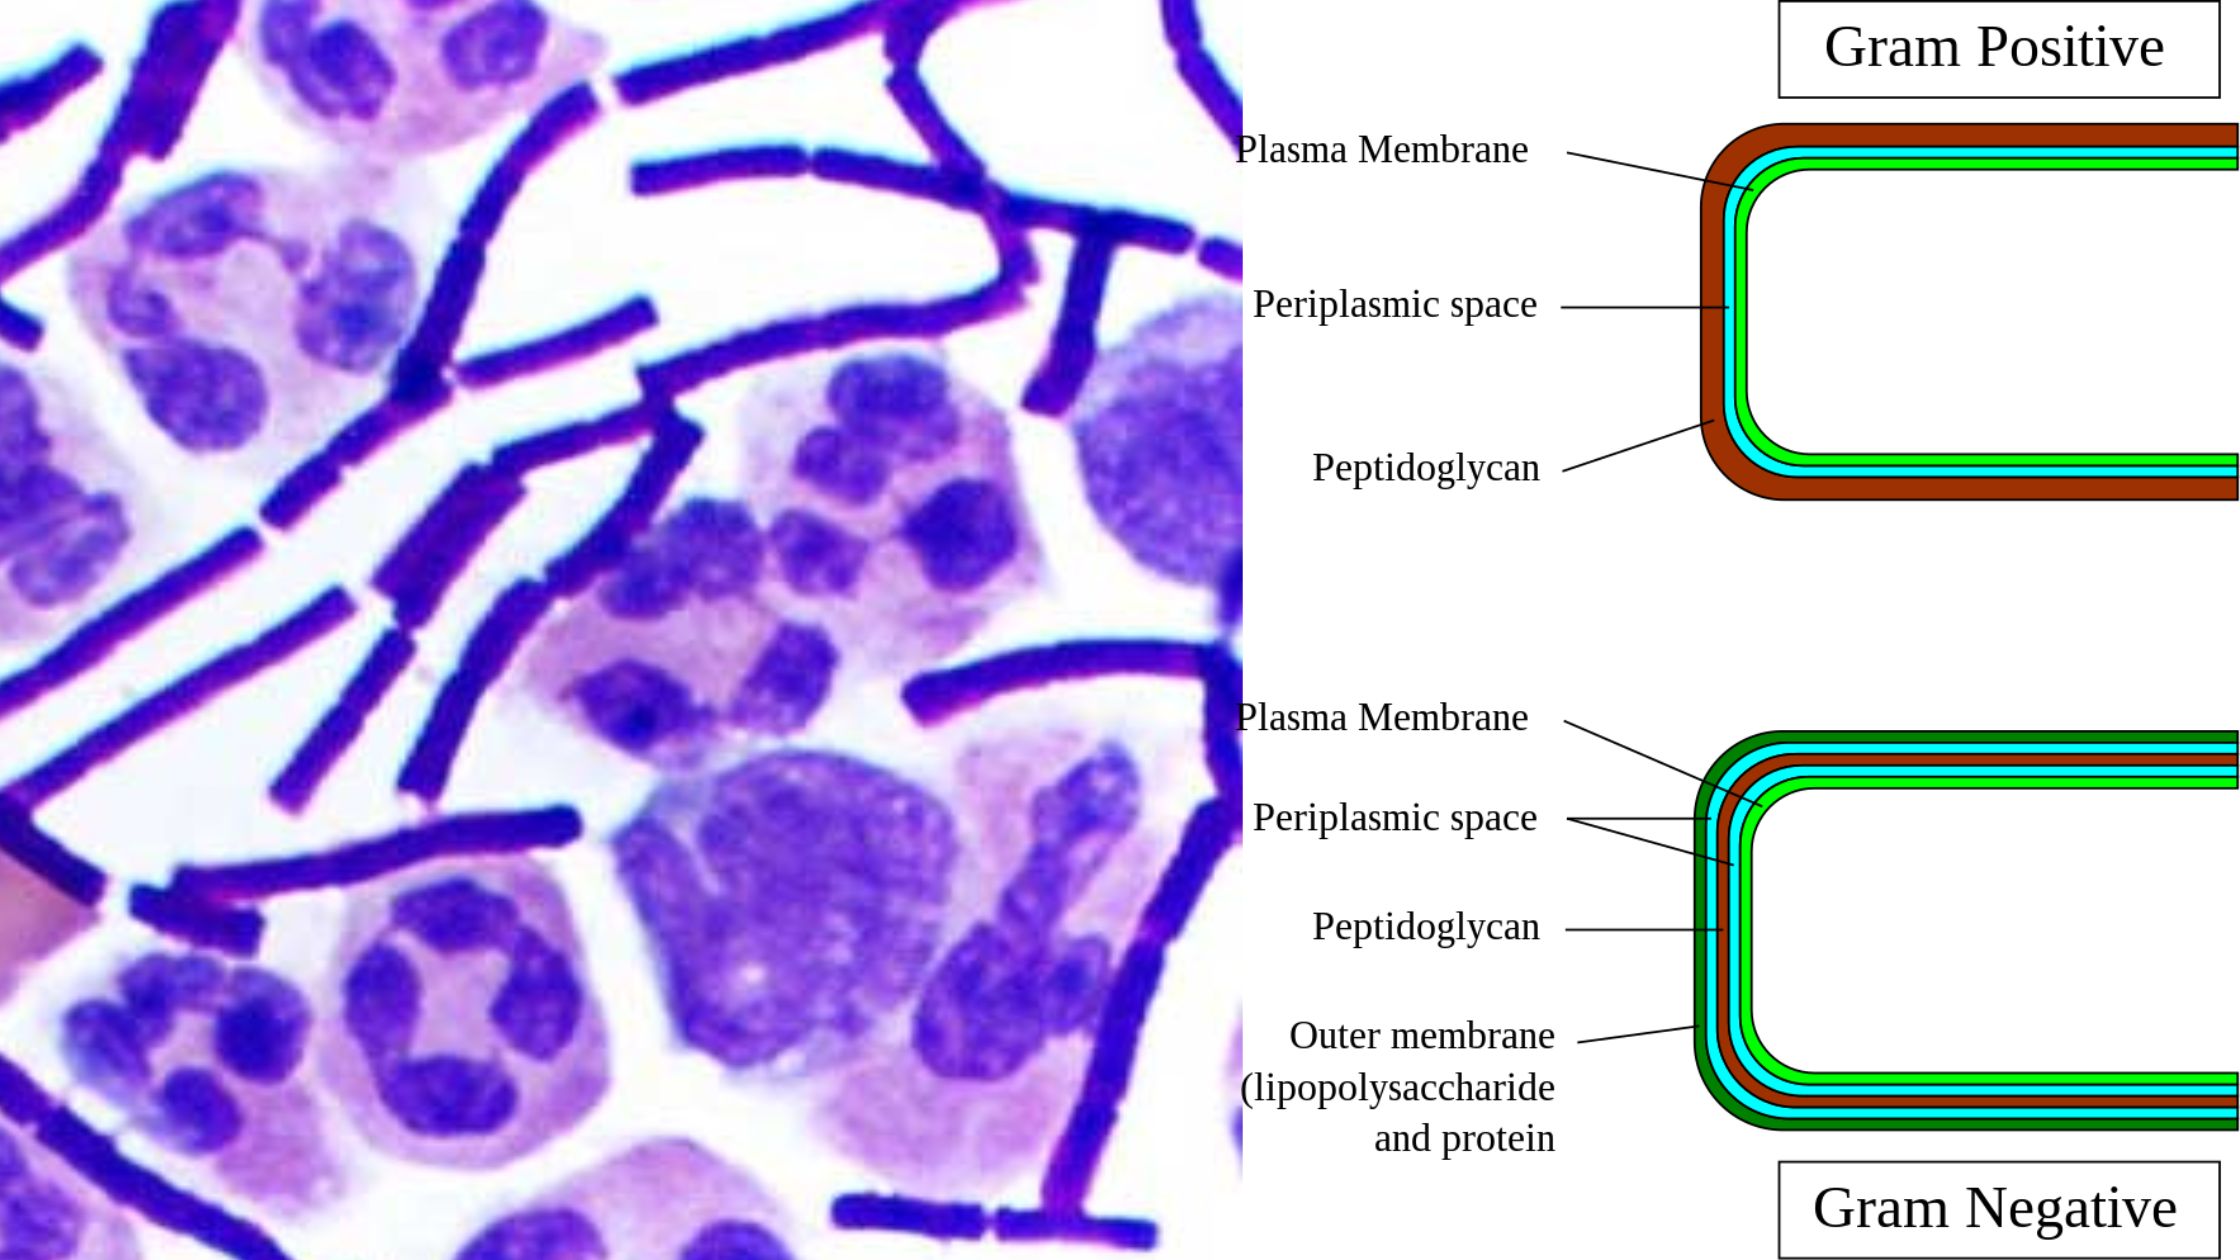 Gram Positive bacteria - Definition, Structure, Characteristics, Examples